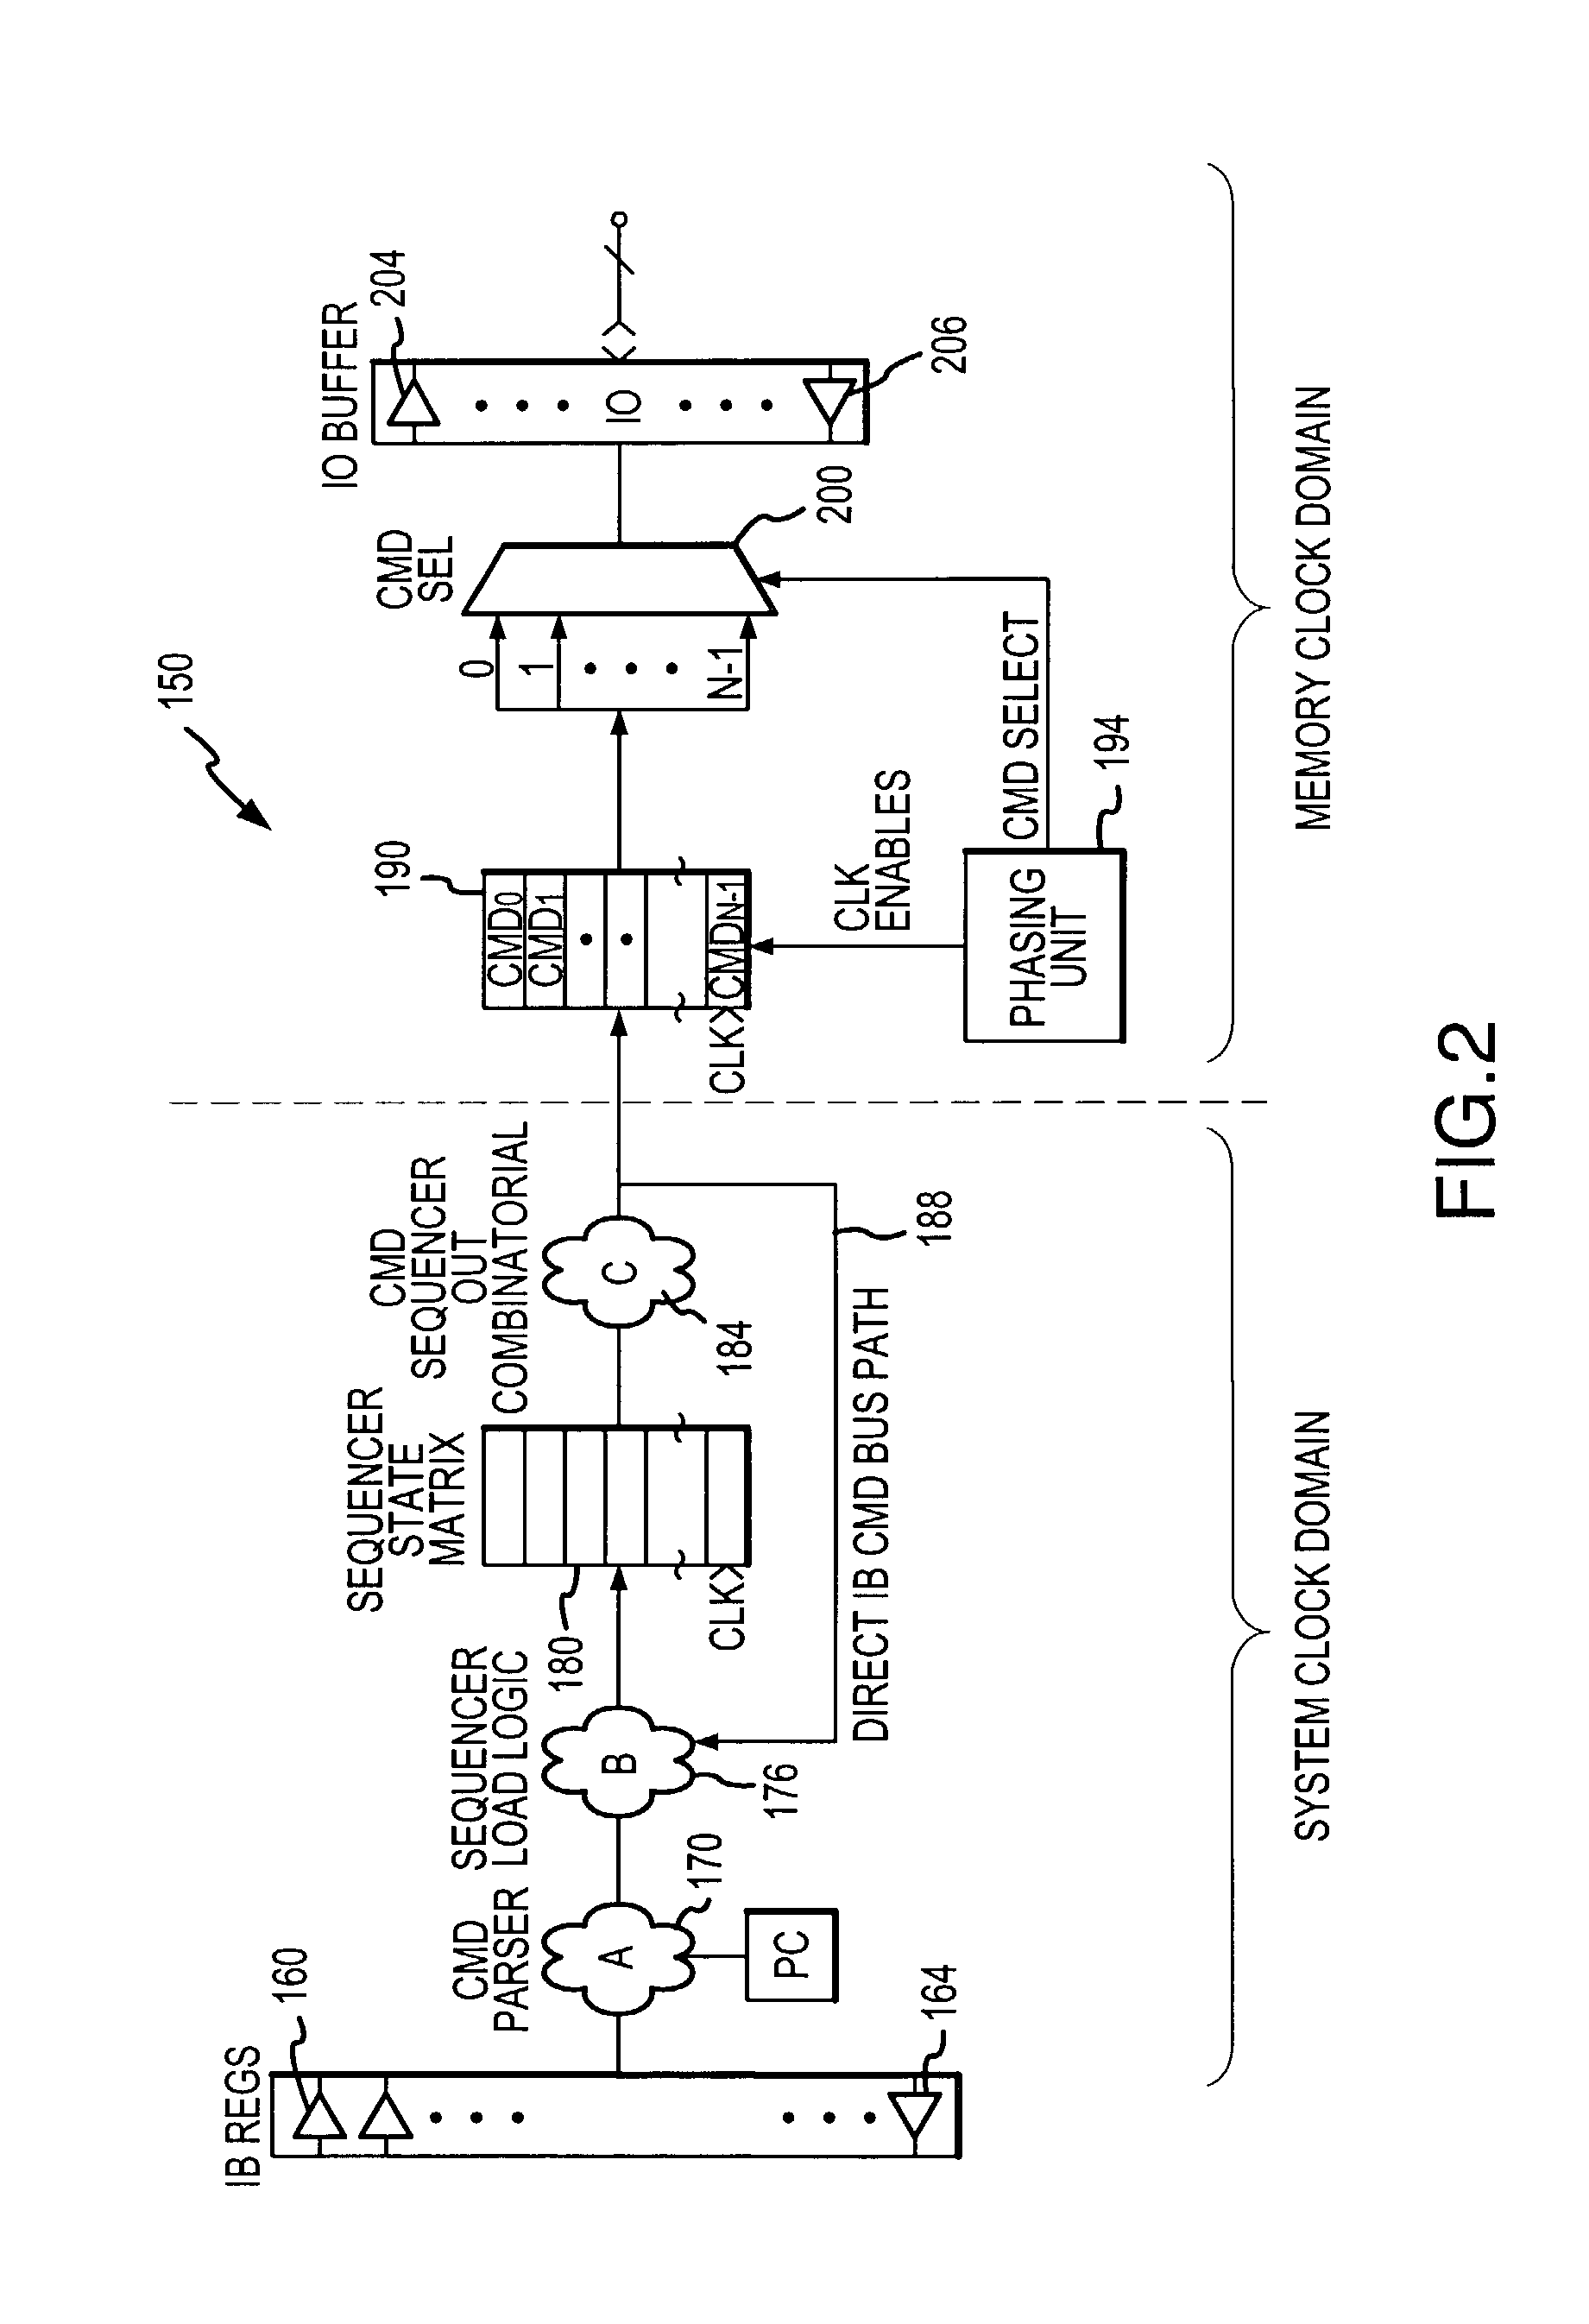 Memory device sequencer and method supporting multiple memory device clock speeds